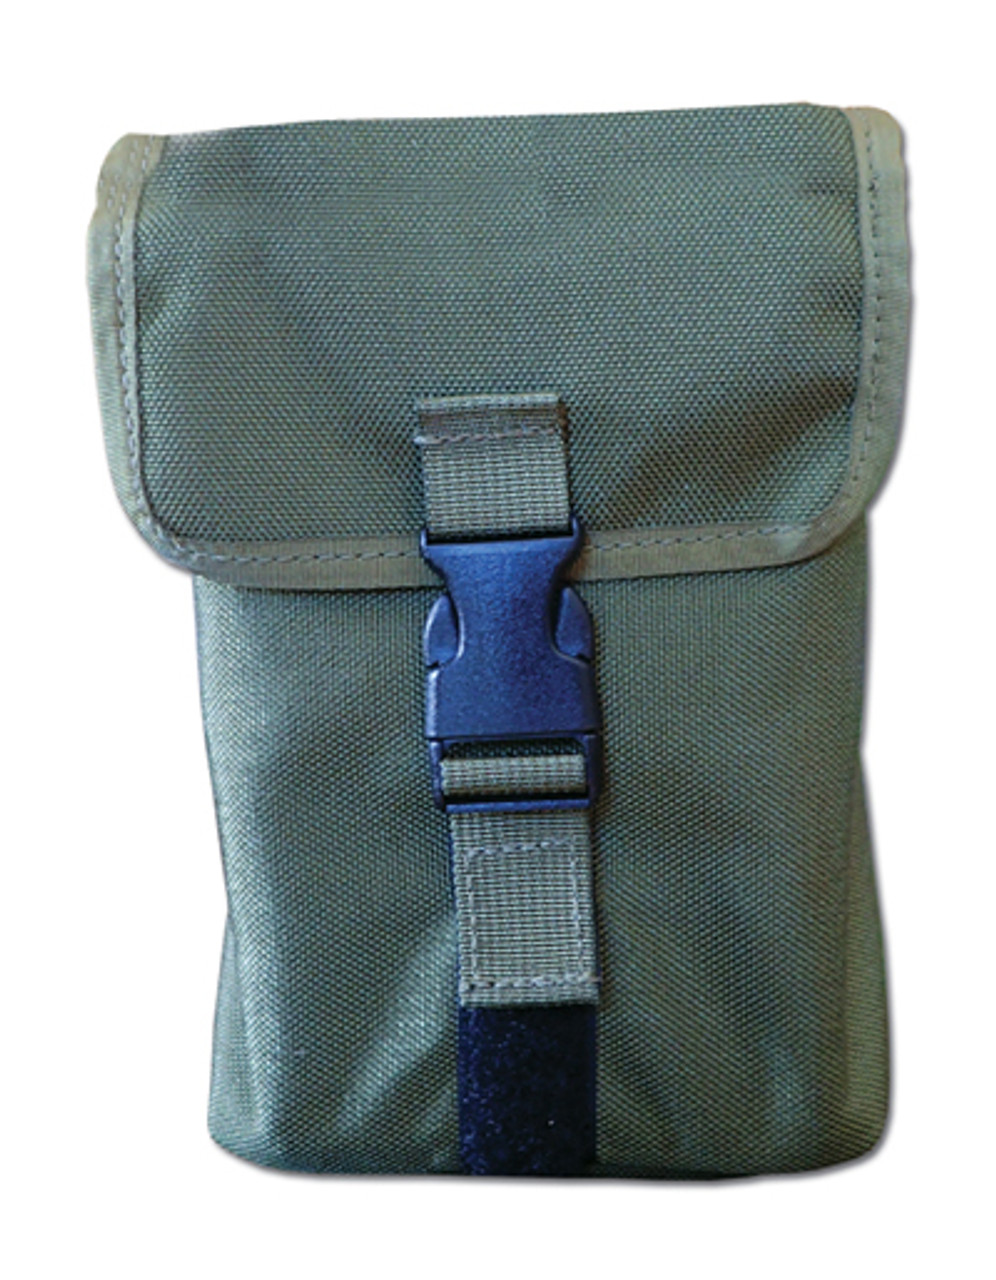 ESEE-Kit Tin Pouch (KIT-TIN-POUCH-OD)- OD Green